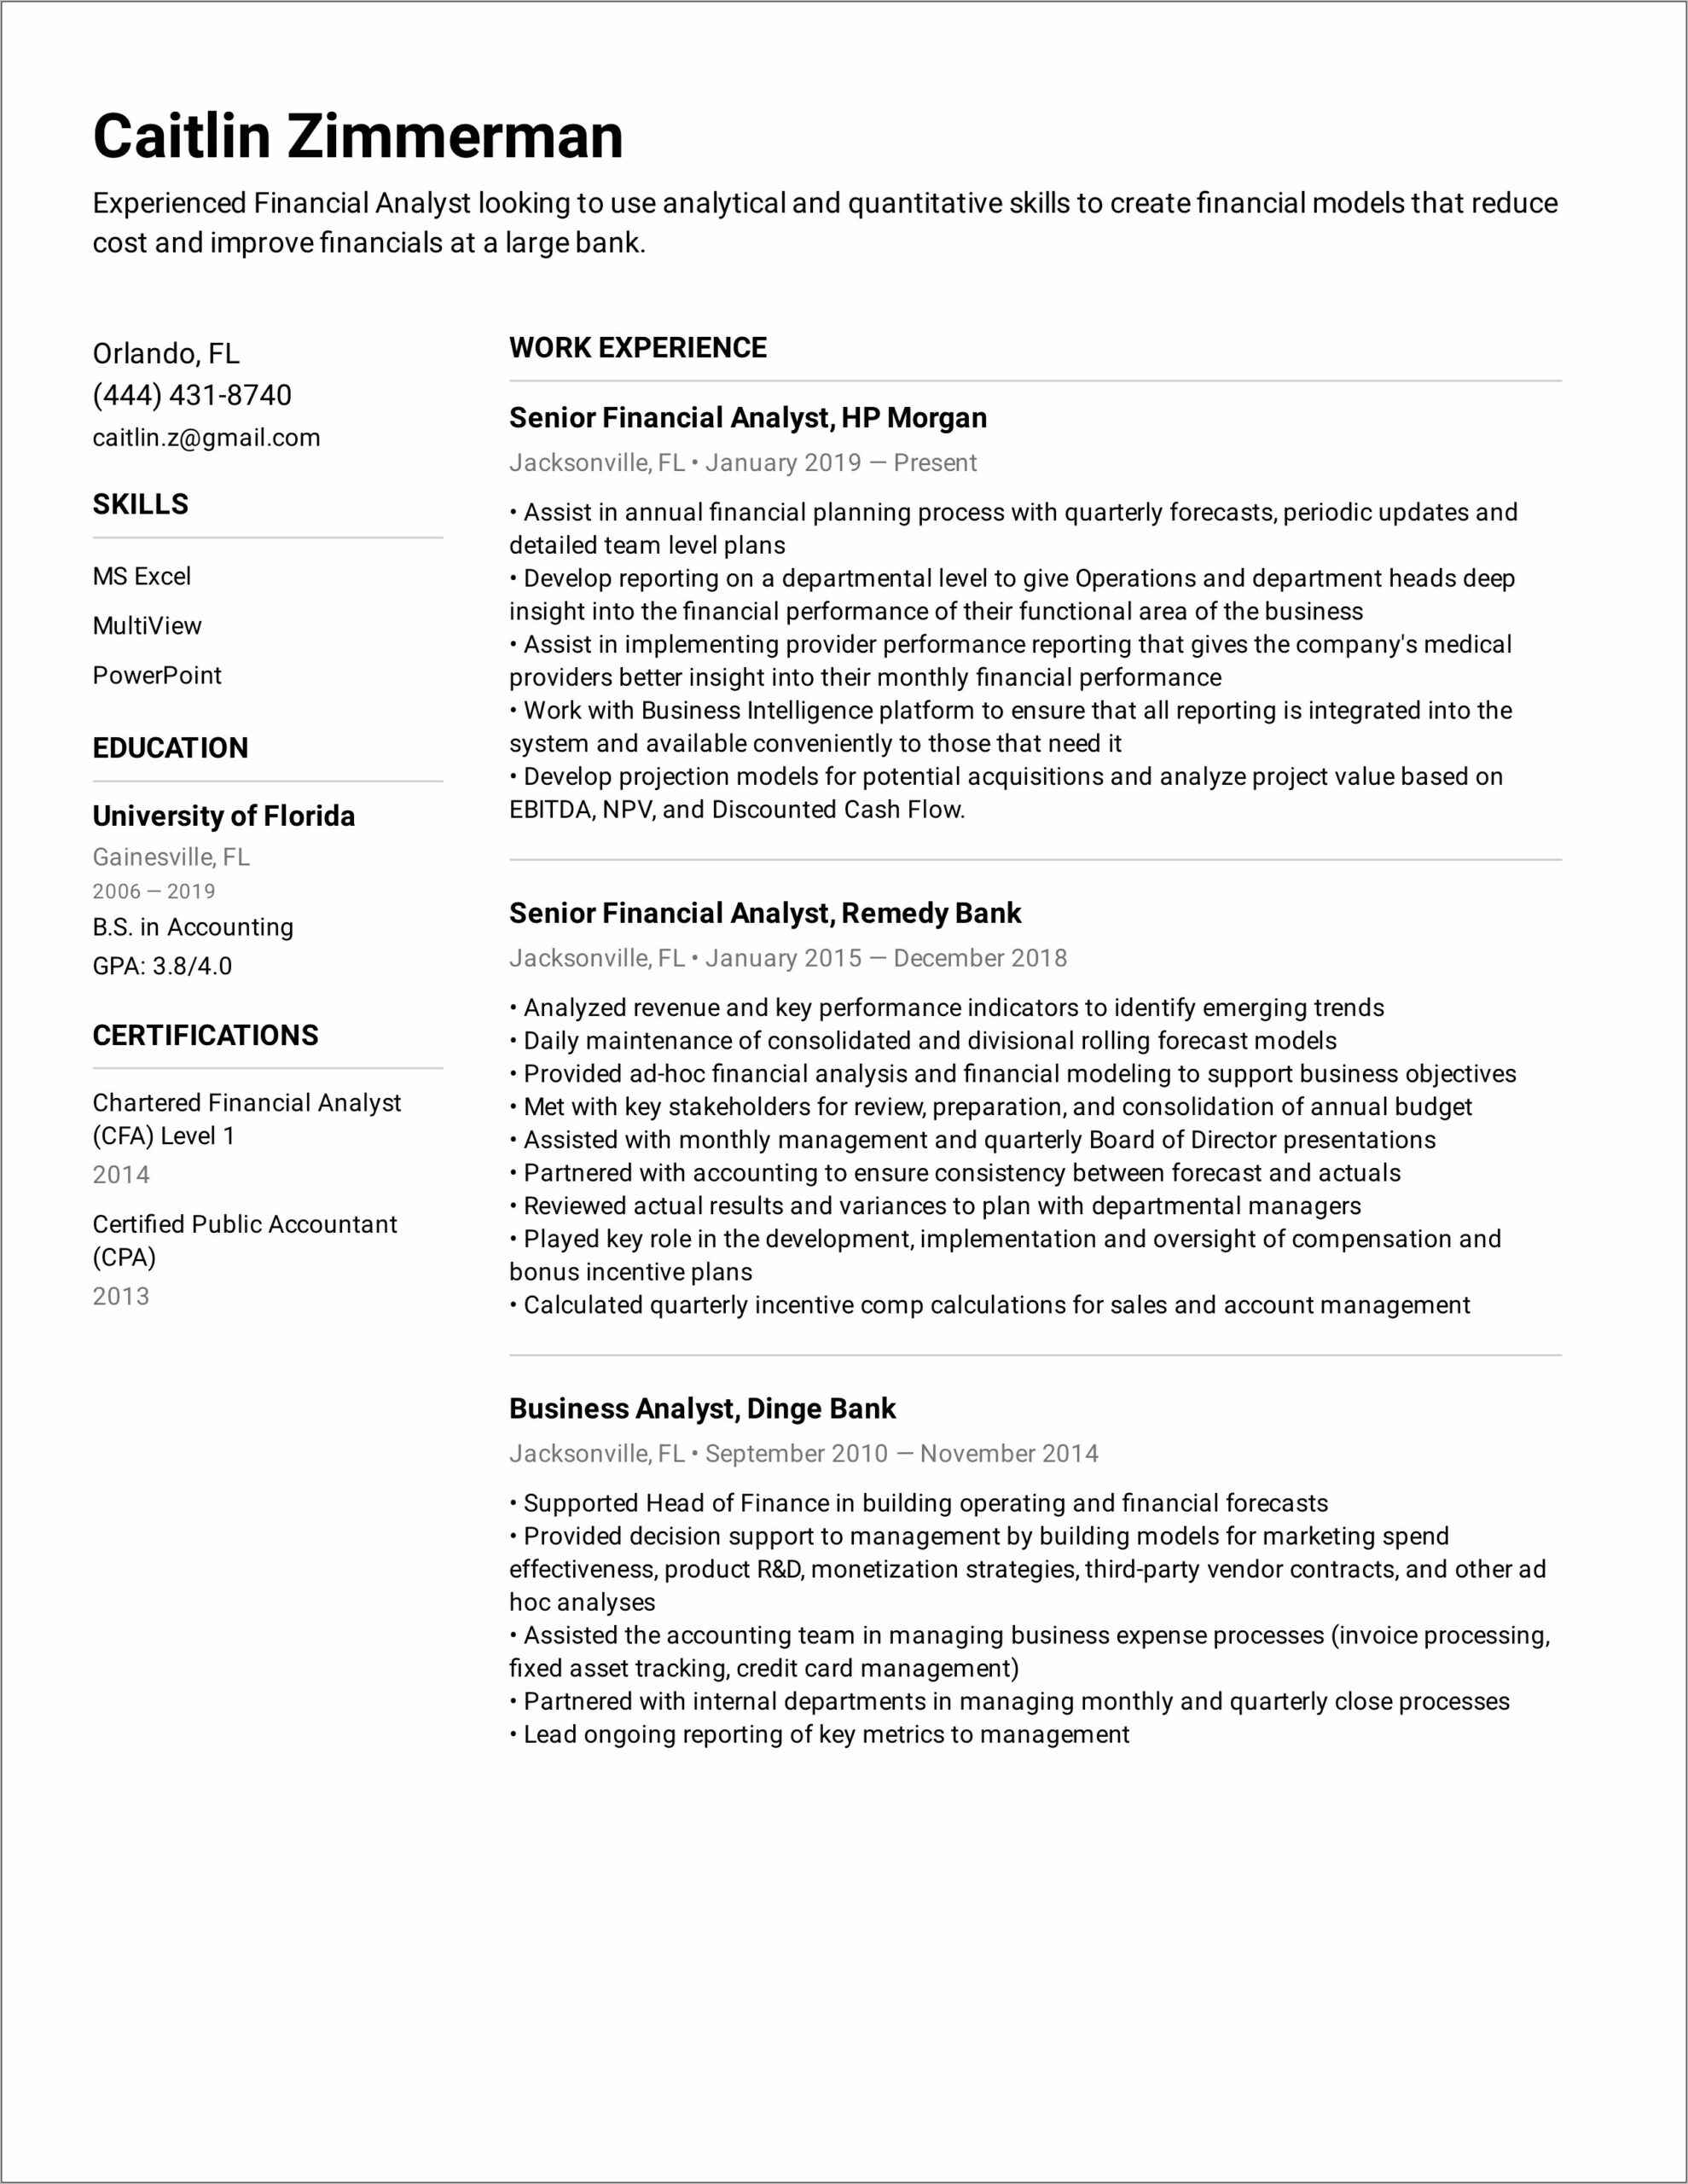 Financial Analyst Certification Resume Examples